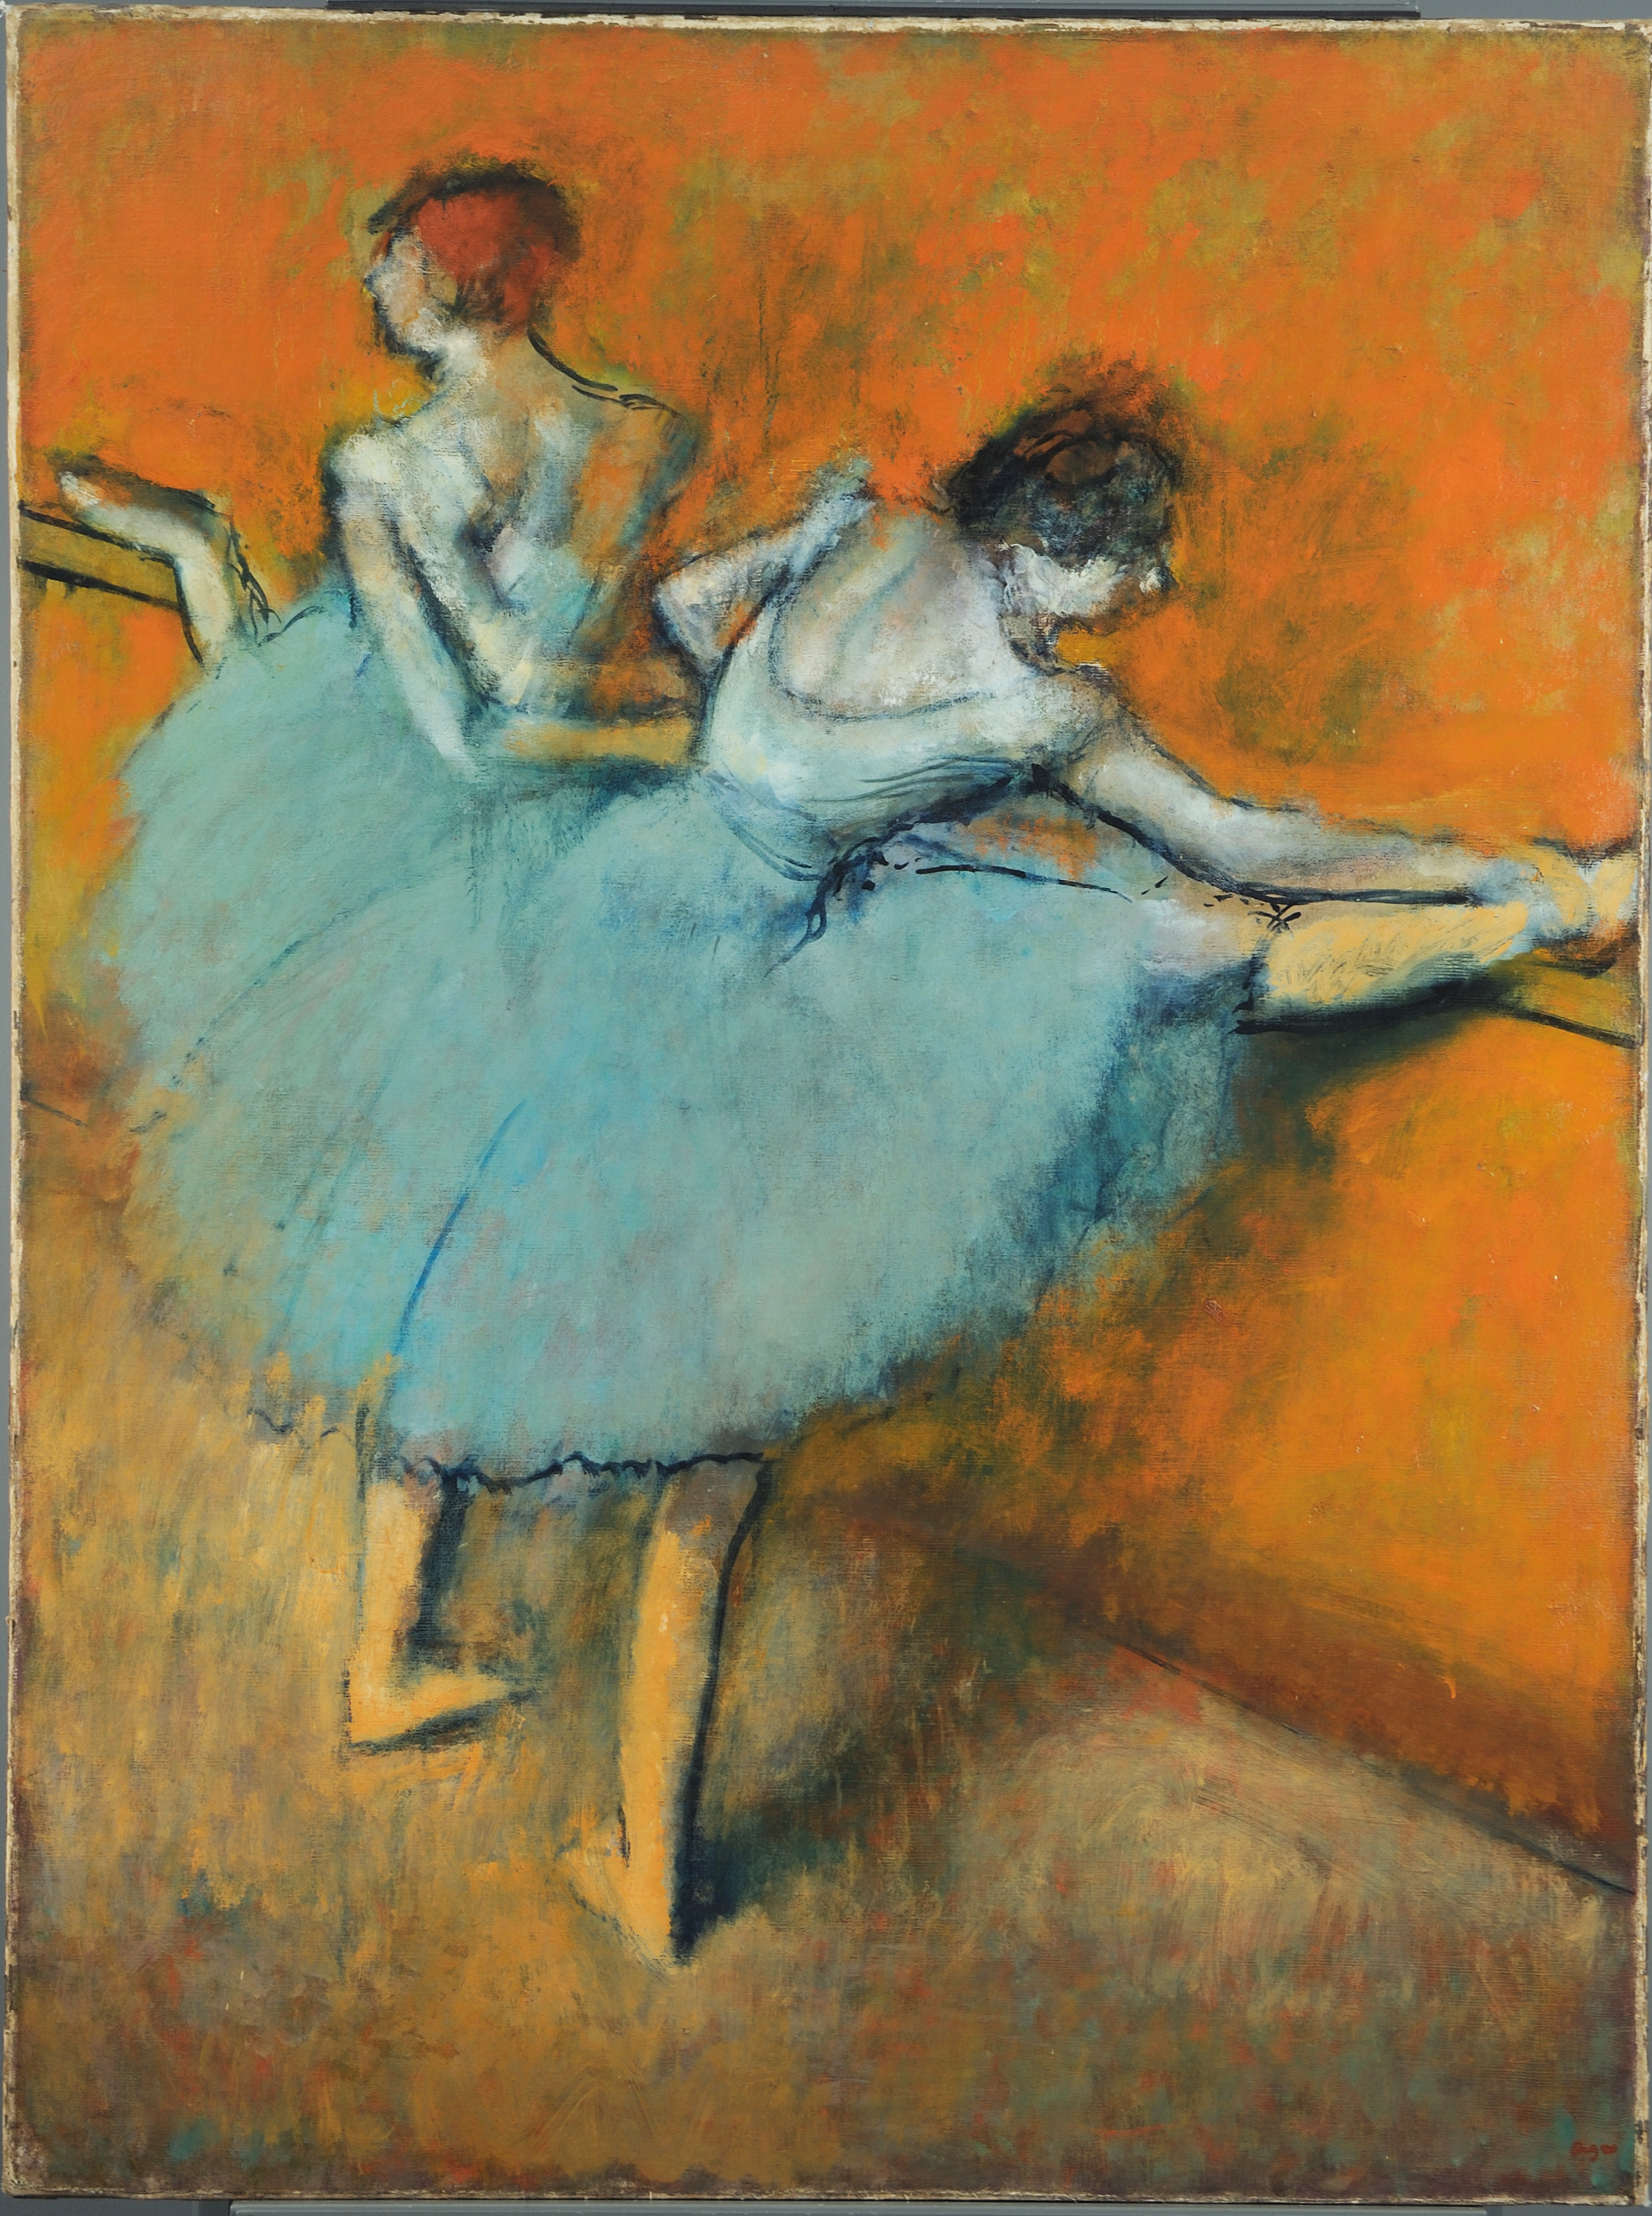 Dancers at the Barre by Edgar Degas - ca. 1900 - 51 1/4 x 38 1/2 in The Phillips Collection